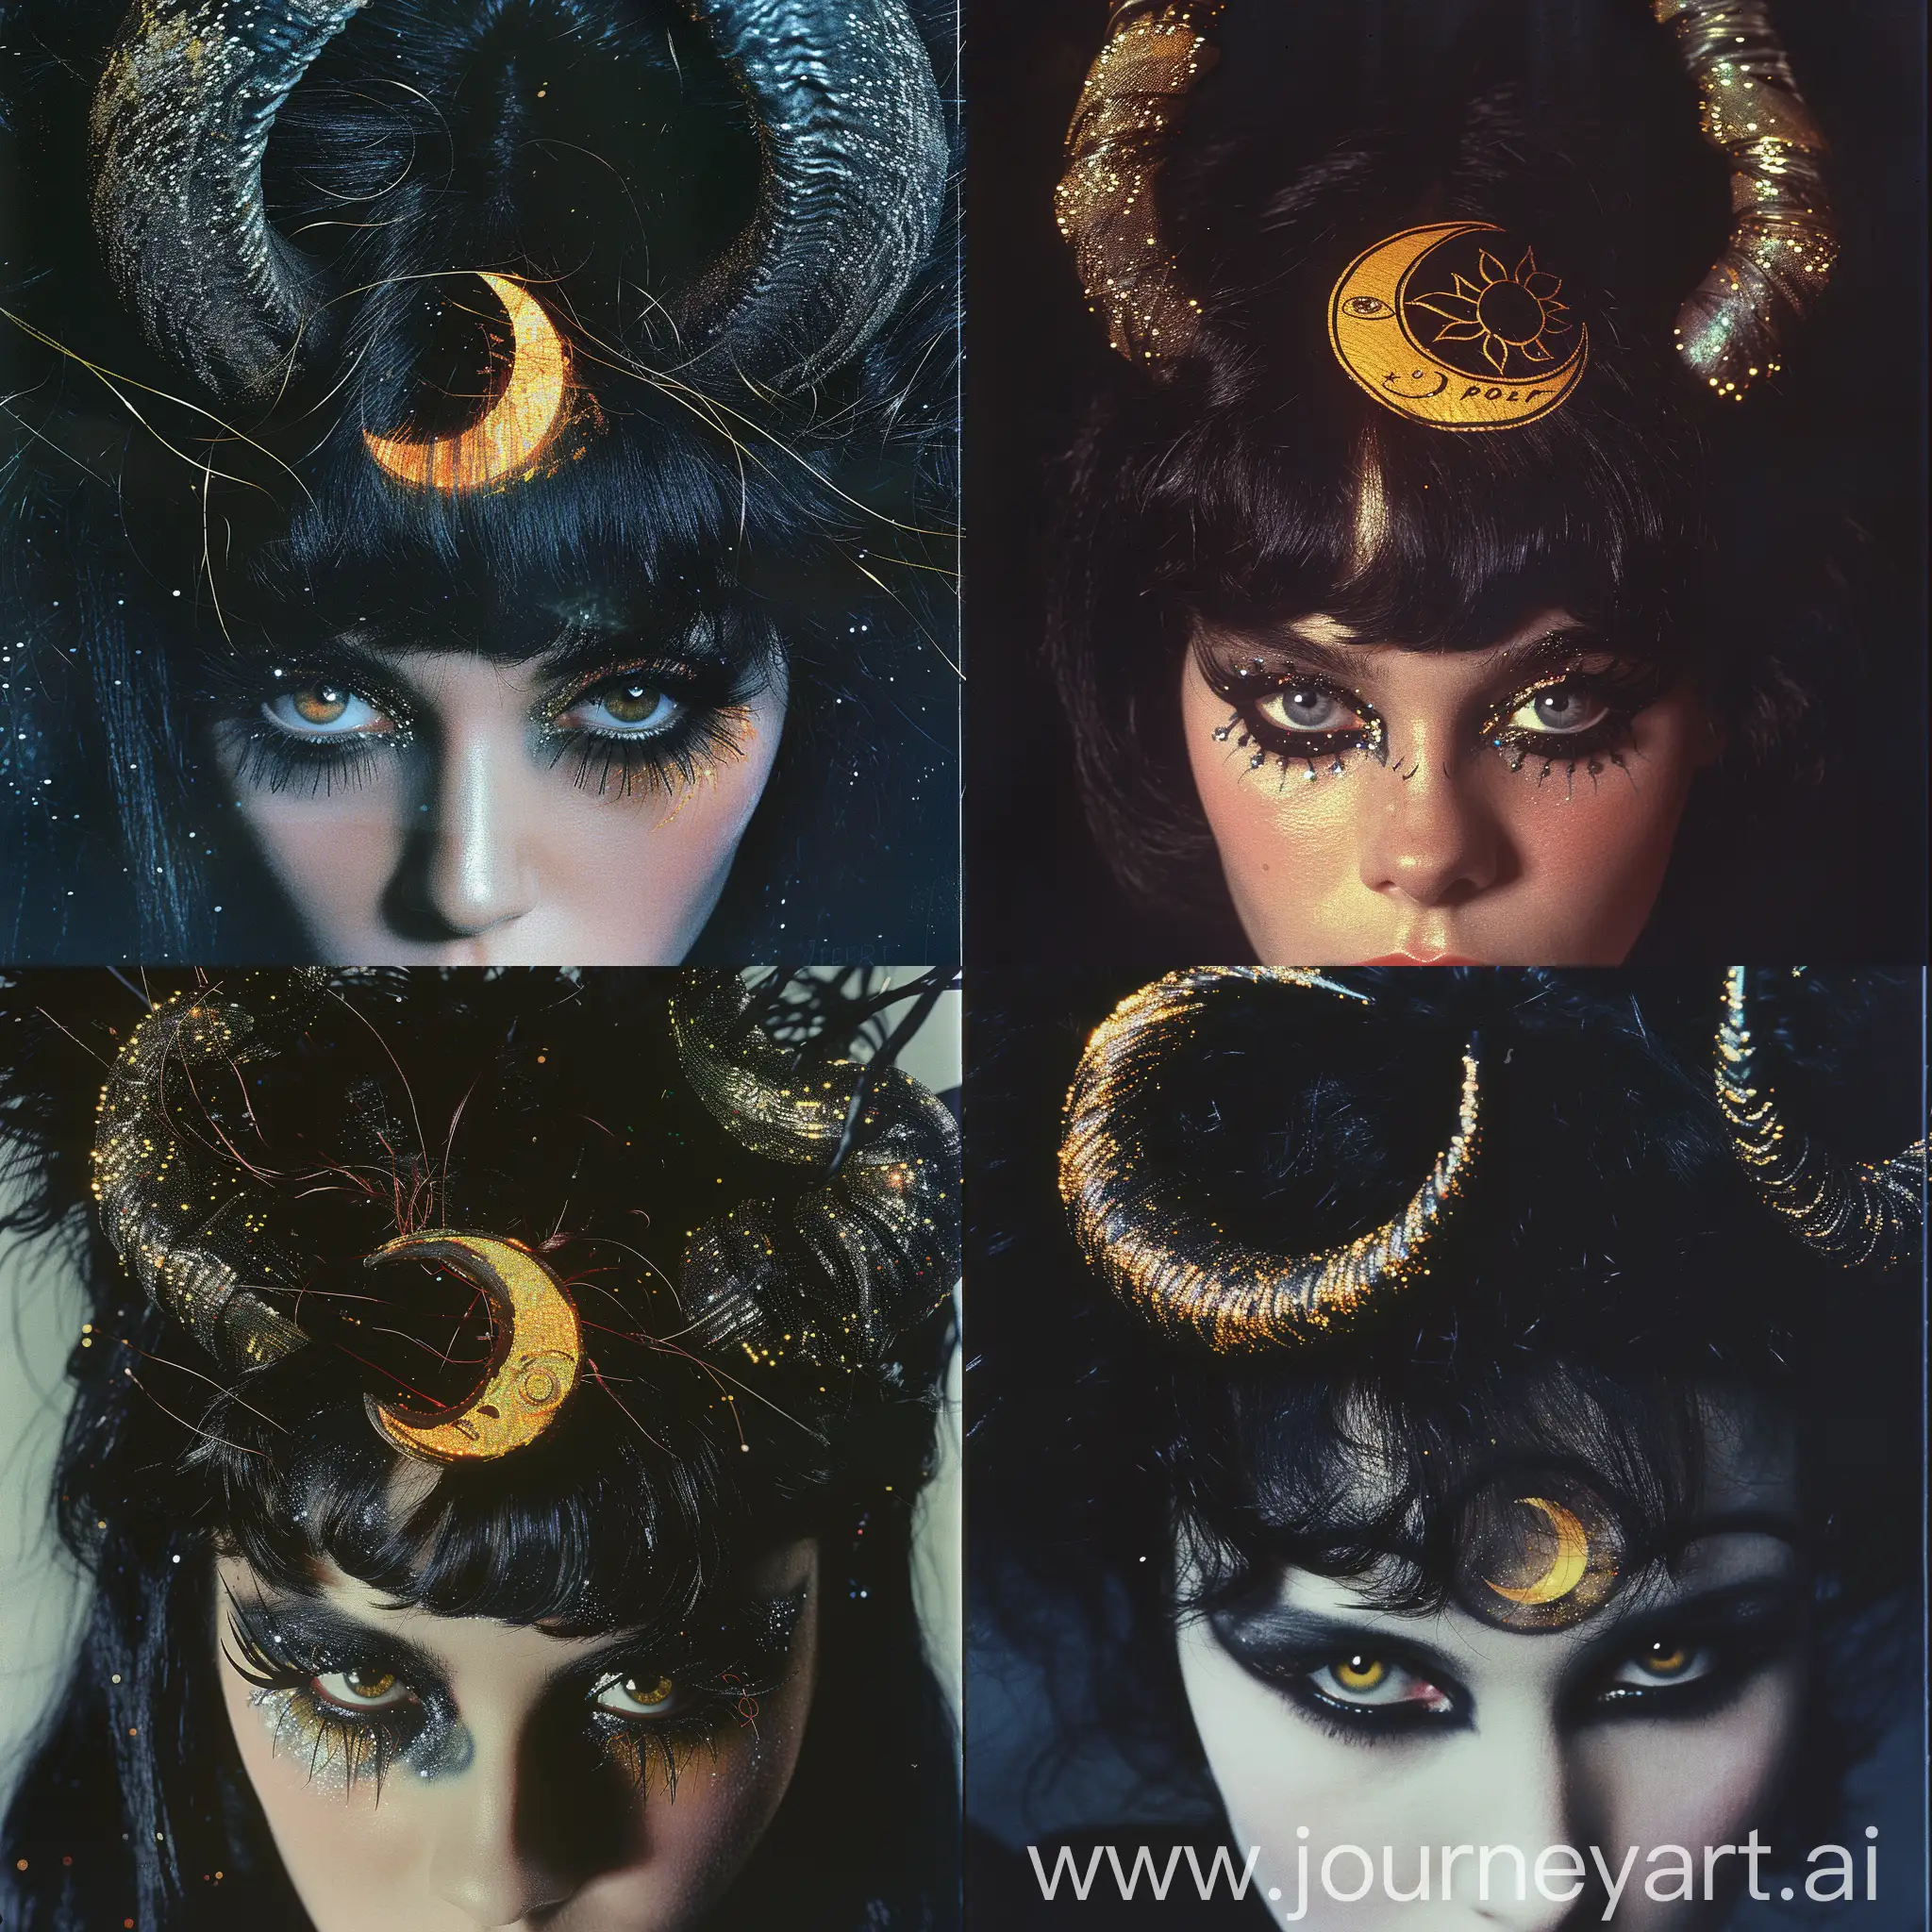 1980-Portrait-of-a-Girl-Ominous-BlackHaired-Demon-with-Opalescent-Features-and-Twisted-Horns